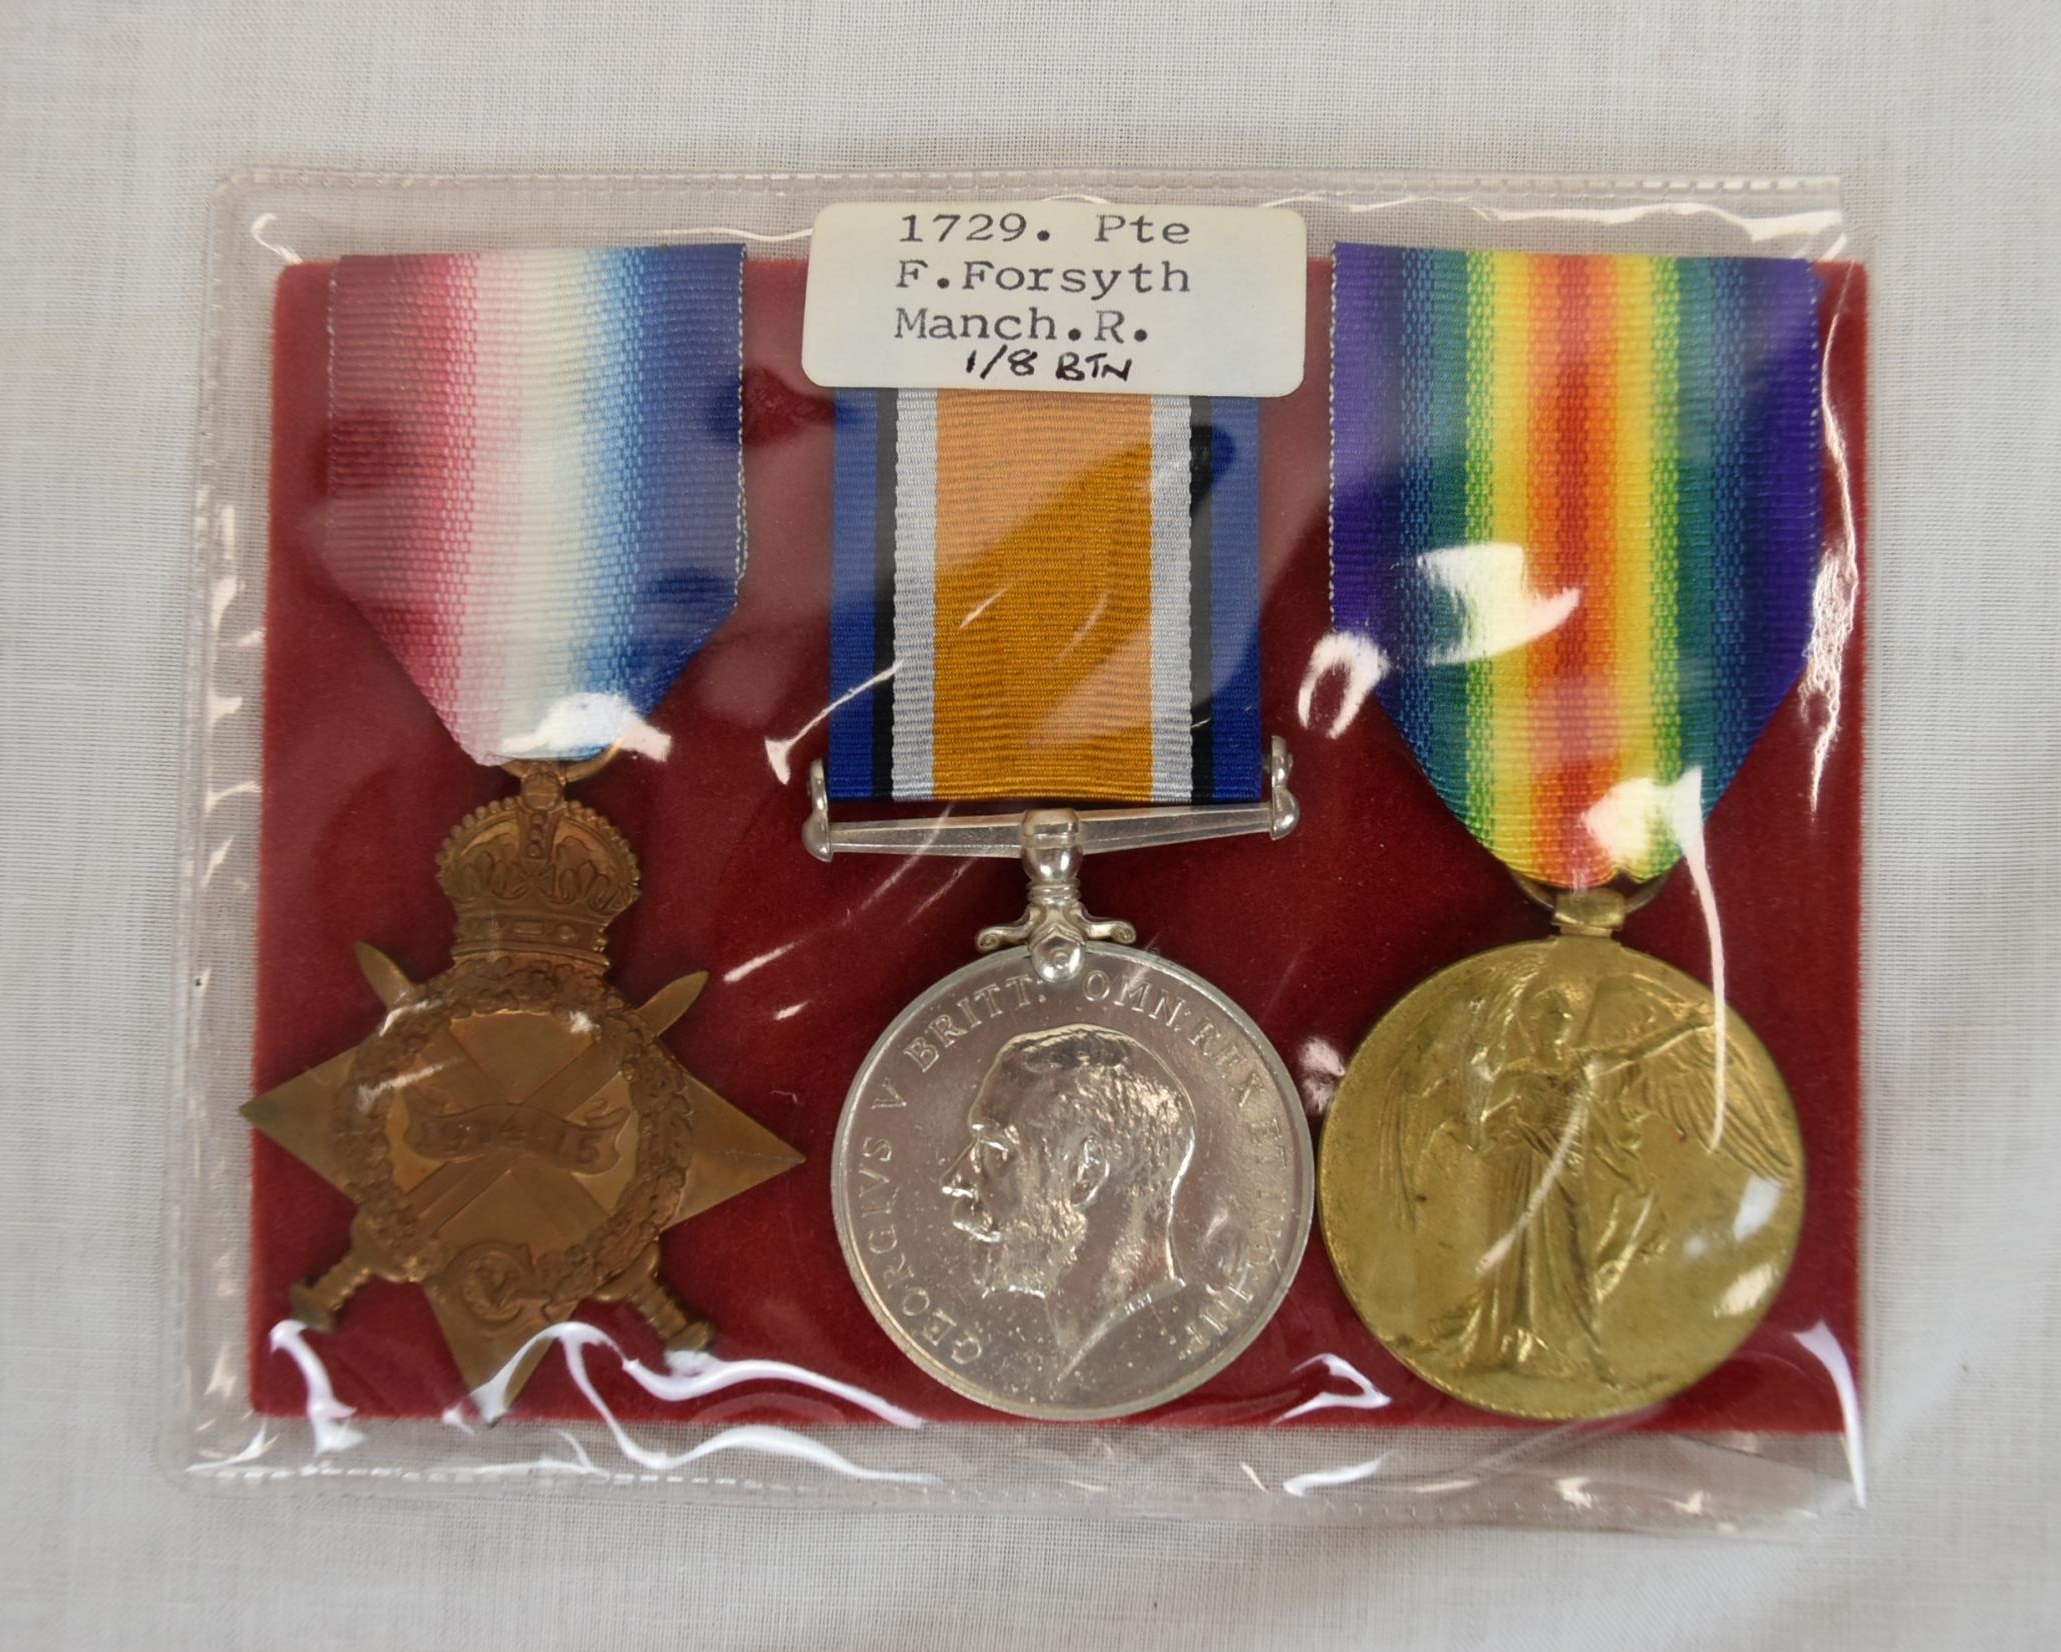 Pte Frank Forsyth of the Manchester Regiment. Medals with description card of soldier.